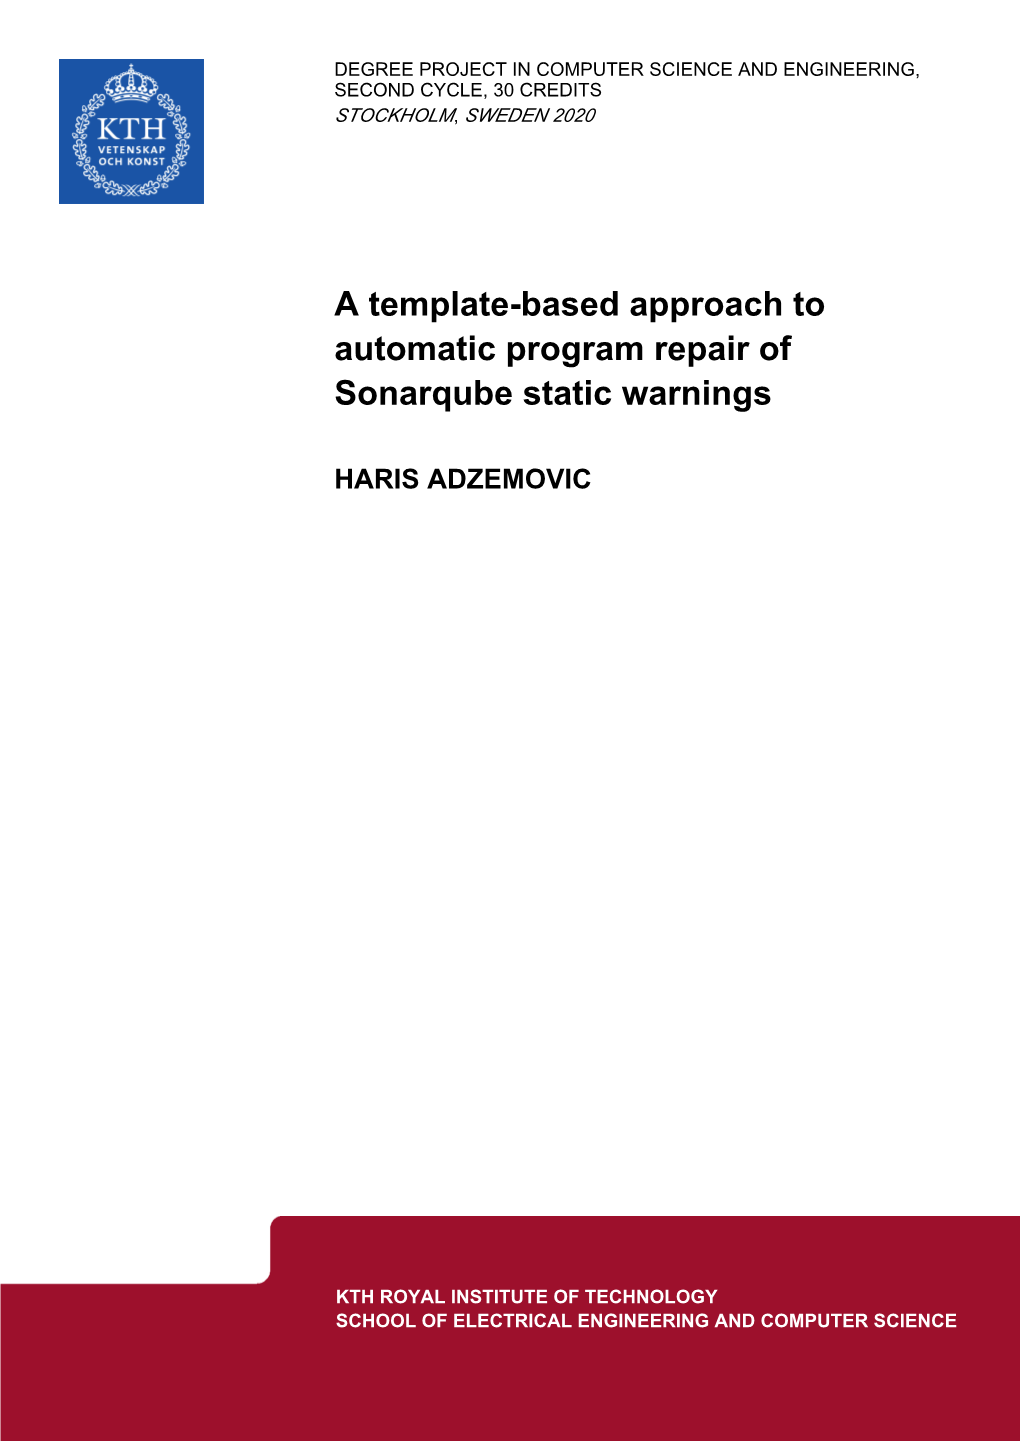 A Template-Based Approach to Automatic Program Repair of Sonarqube Static Warnings